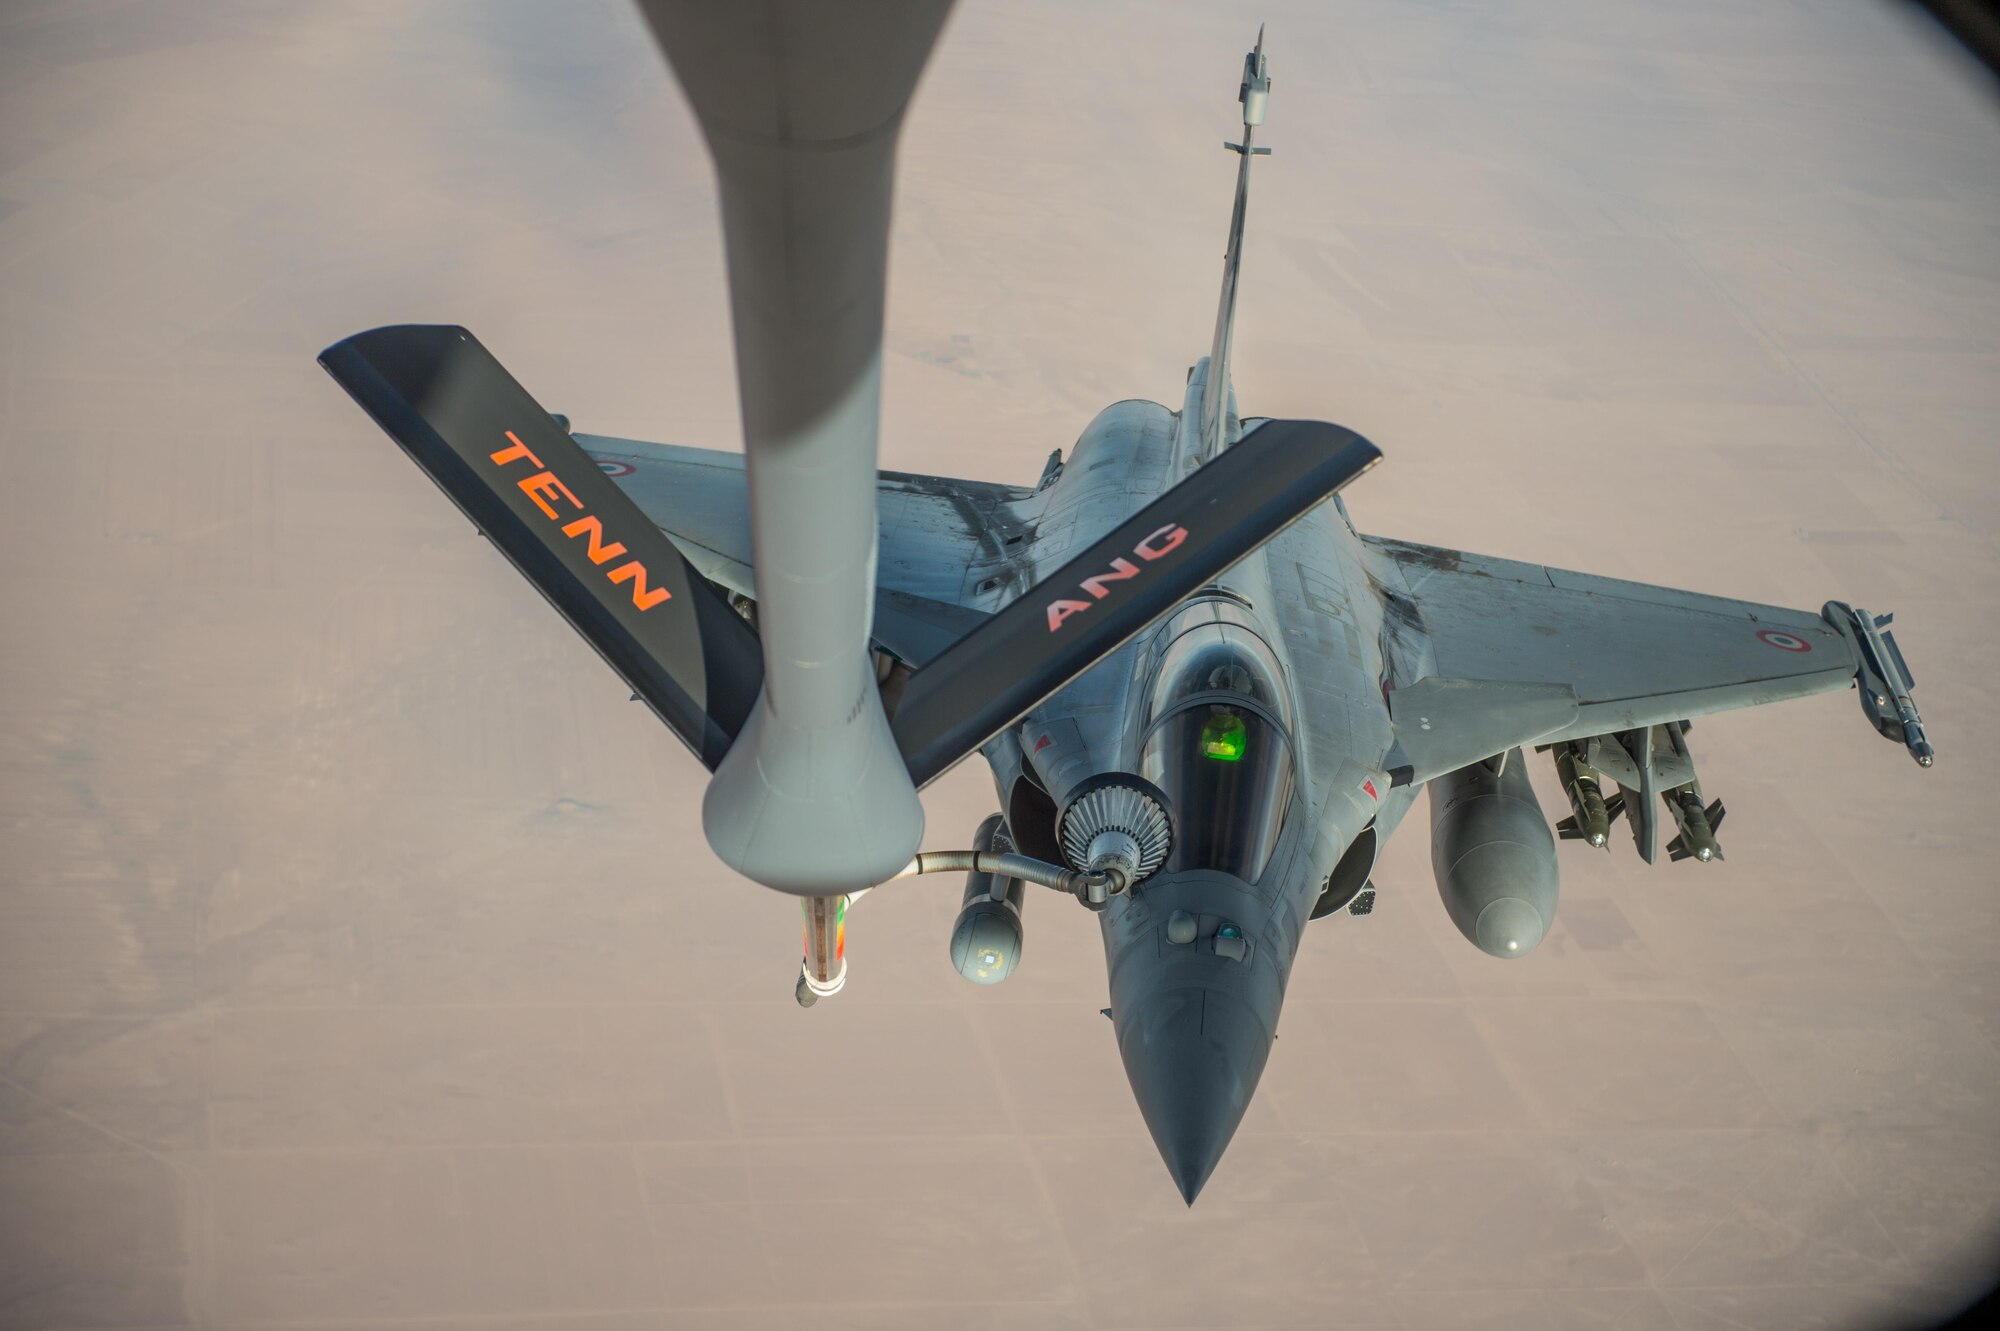 A French air force Rafale receives fuel from a KC-135 Stratotanker over Iraq in support of Operation Inherent Resolve Oct 17, 2016. The operational mission of Operation Inherent Resolve is to militarily defeat Da'esh in the Combined Joint Operation Area in order to enable whole-of-coalition governmental actions to increase regional stability. (U.S. Air Force photo by Staff Sgt. Douglas Ellis/Released)